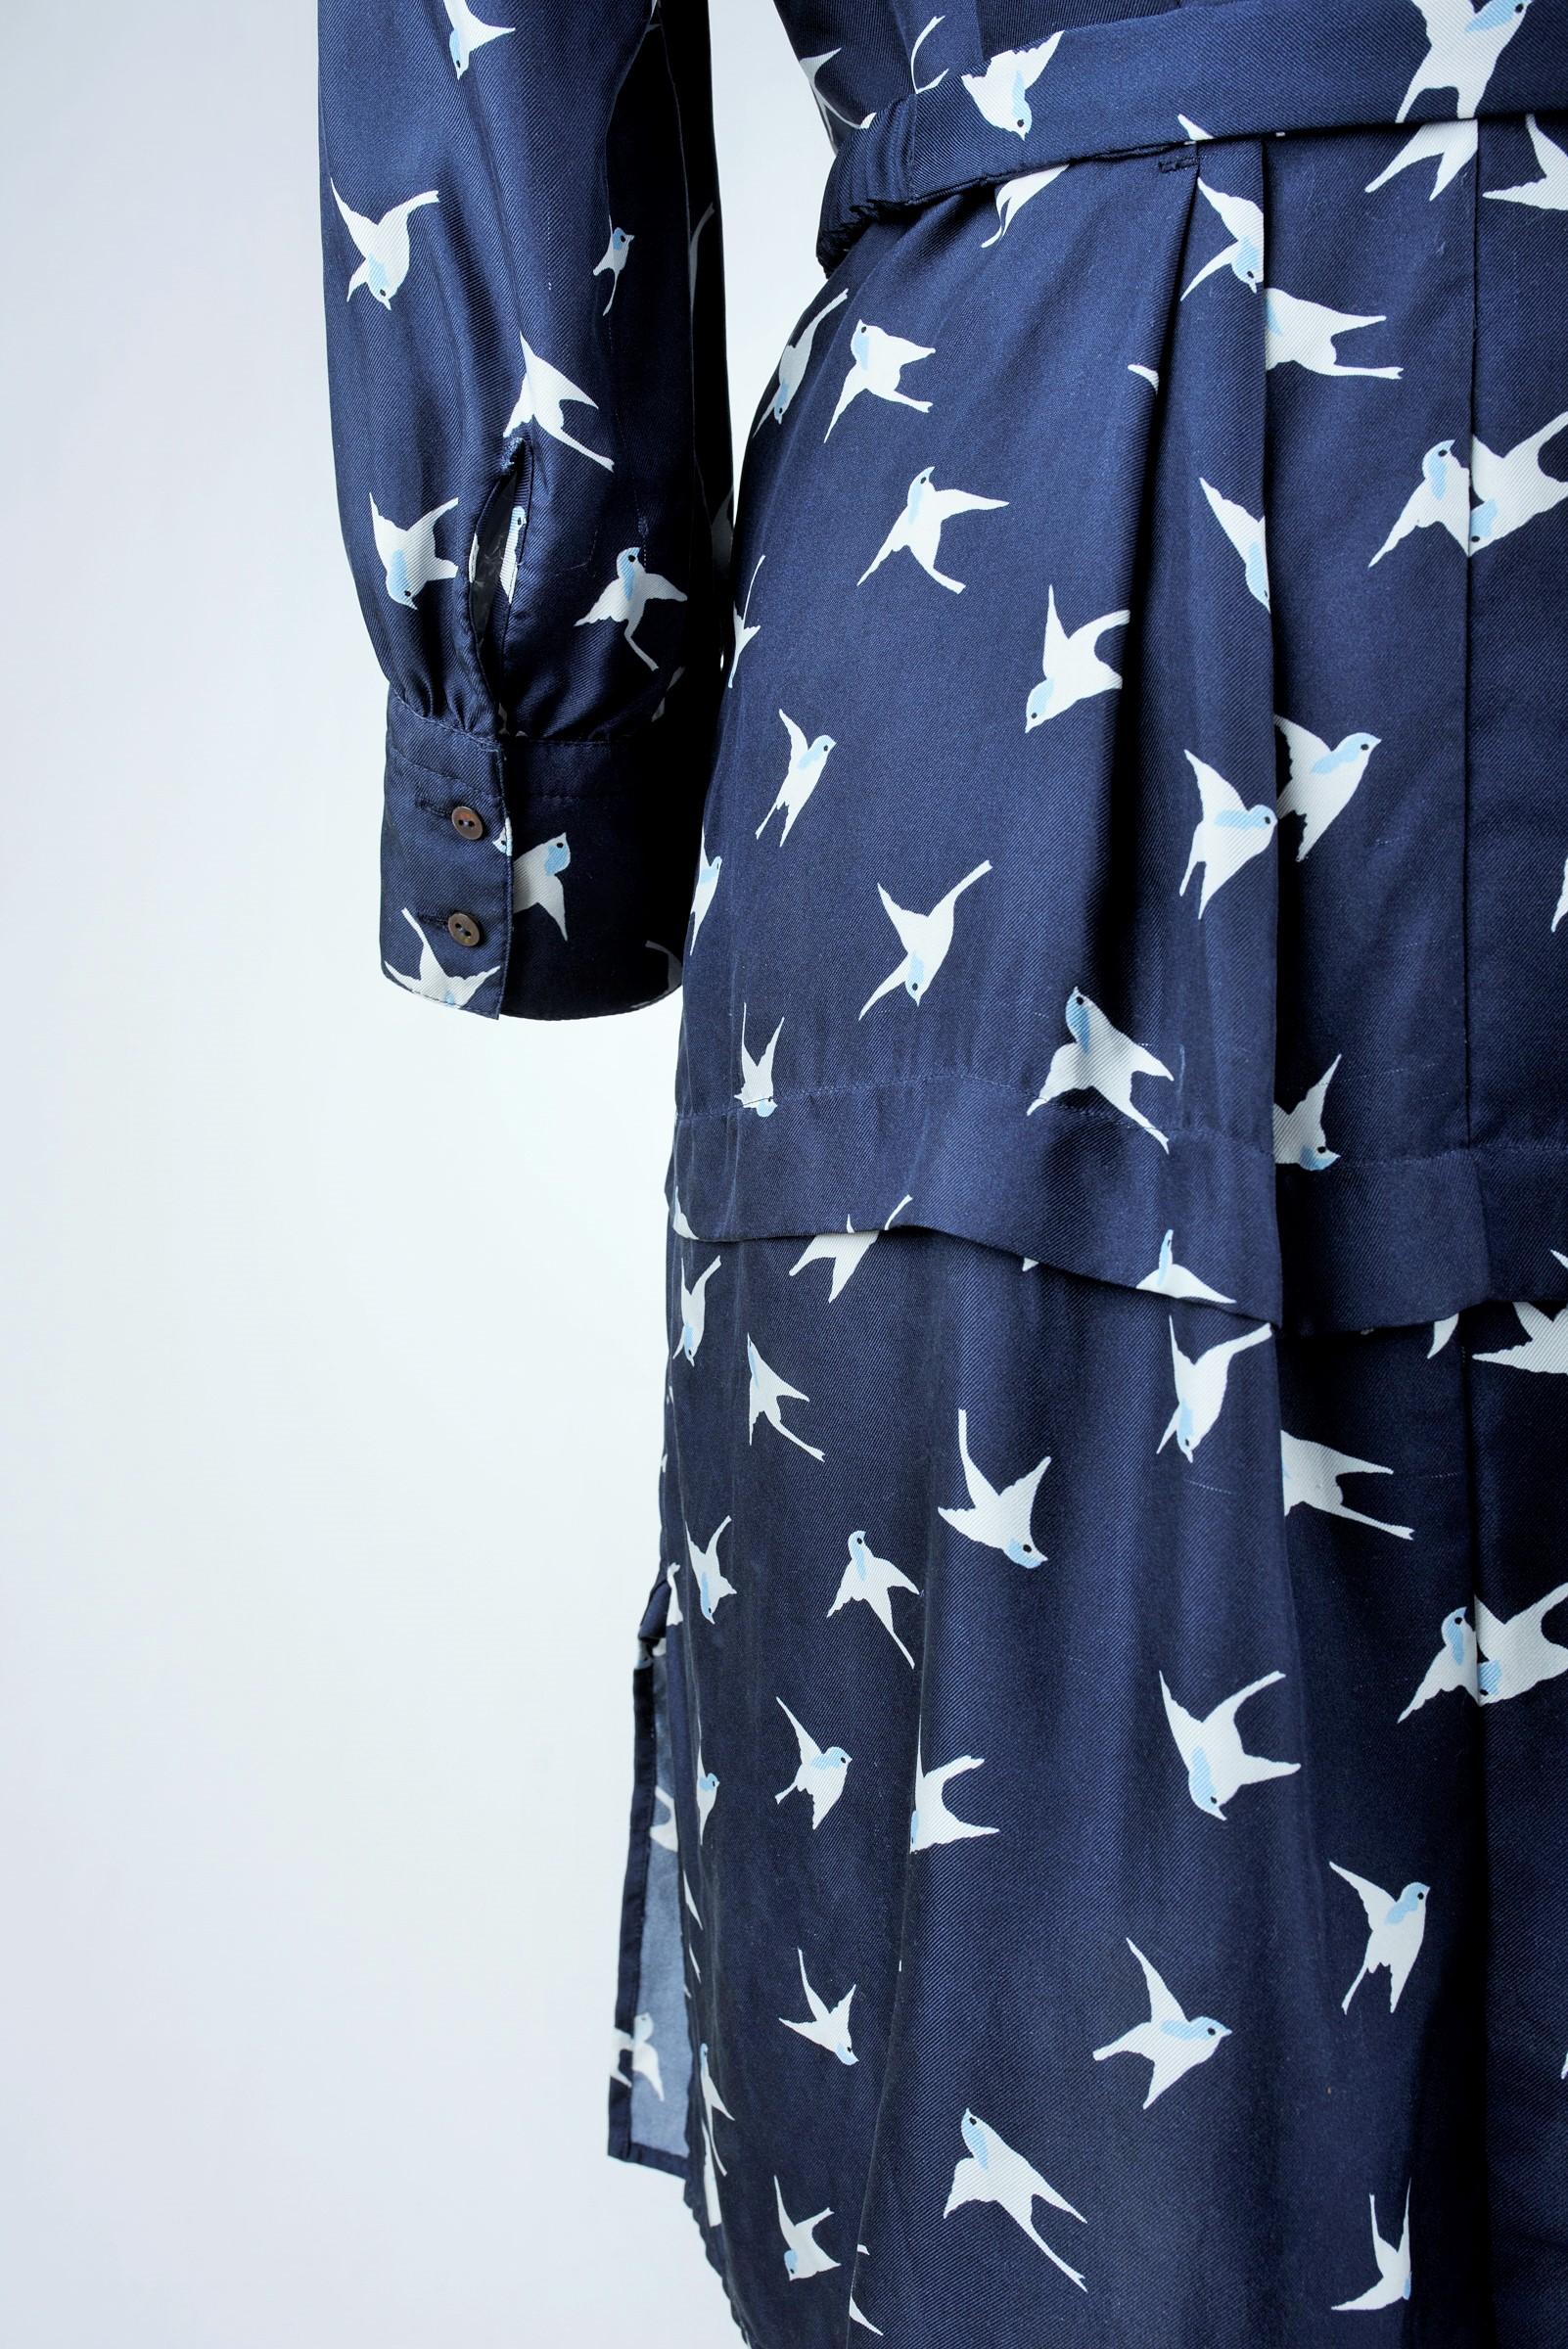 A Blouse dress in navy silk printed with swallows by Nina Ricci Circa 2000 For Sale 9